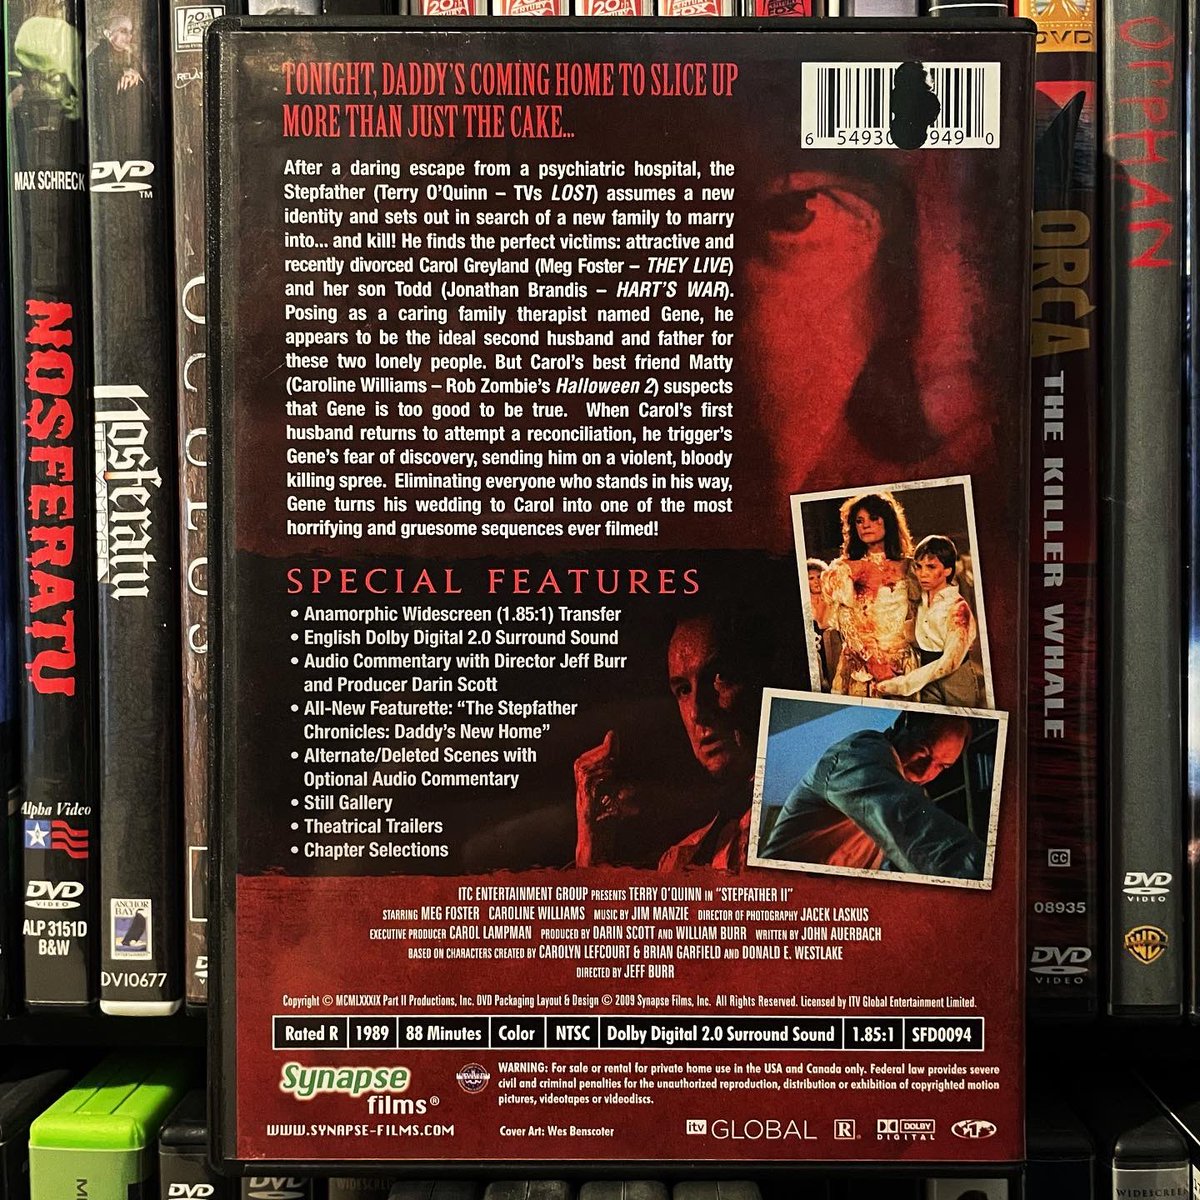 “You can't just walk away from me. Not now. Not ever”
#stepfatheriimakeroomfordaddy #stepfather2 #1989movie #80scinema #80shorror #jeffburr #terryoquinn #megfoster #jonathanbrandis #carolinewilliams #horrormovie #stepfather2makeroomfordaddy #dvd #dvdcollection #dvdcollector